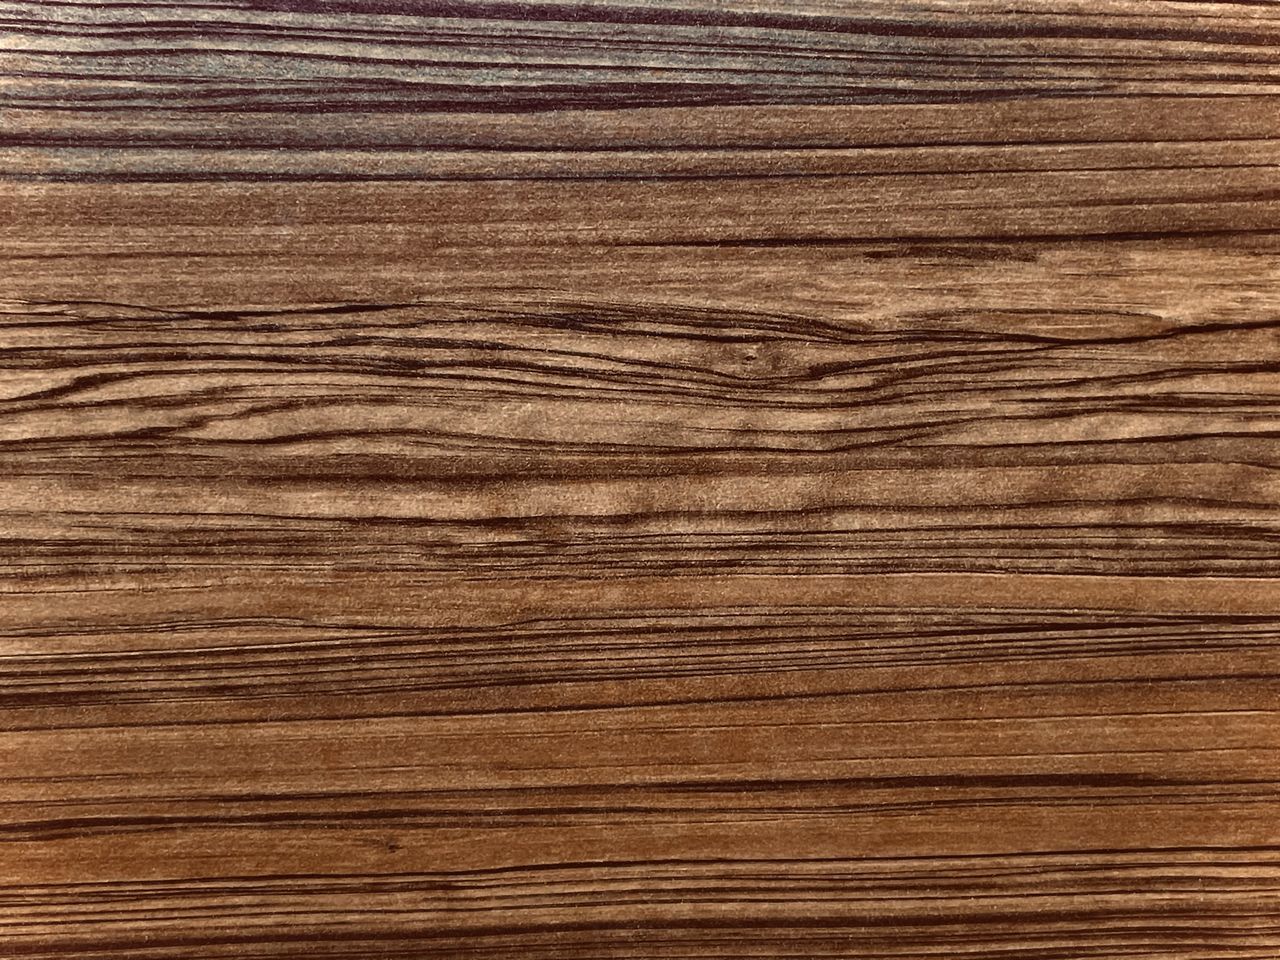 CLOSE-UP OF WOODEN PLANK